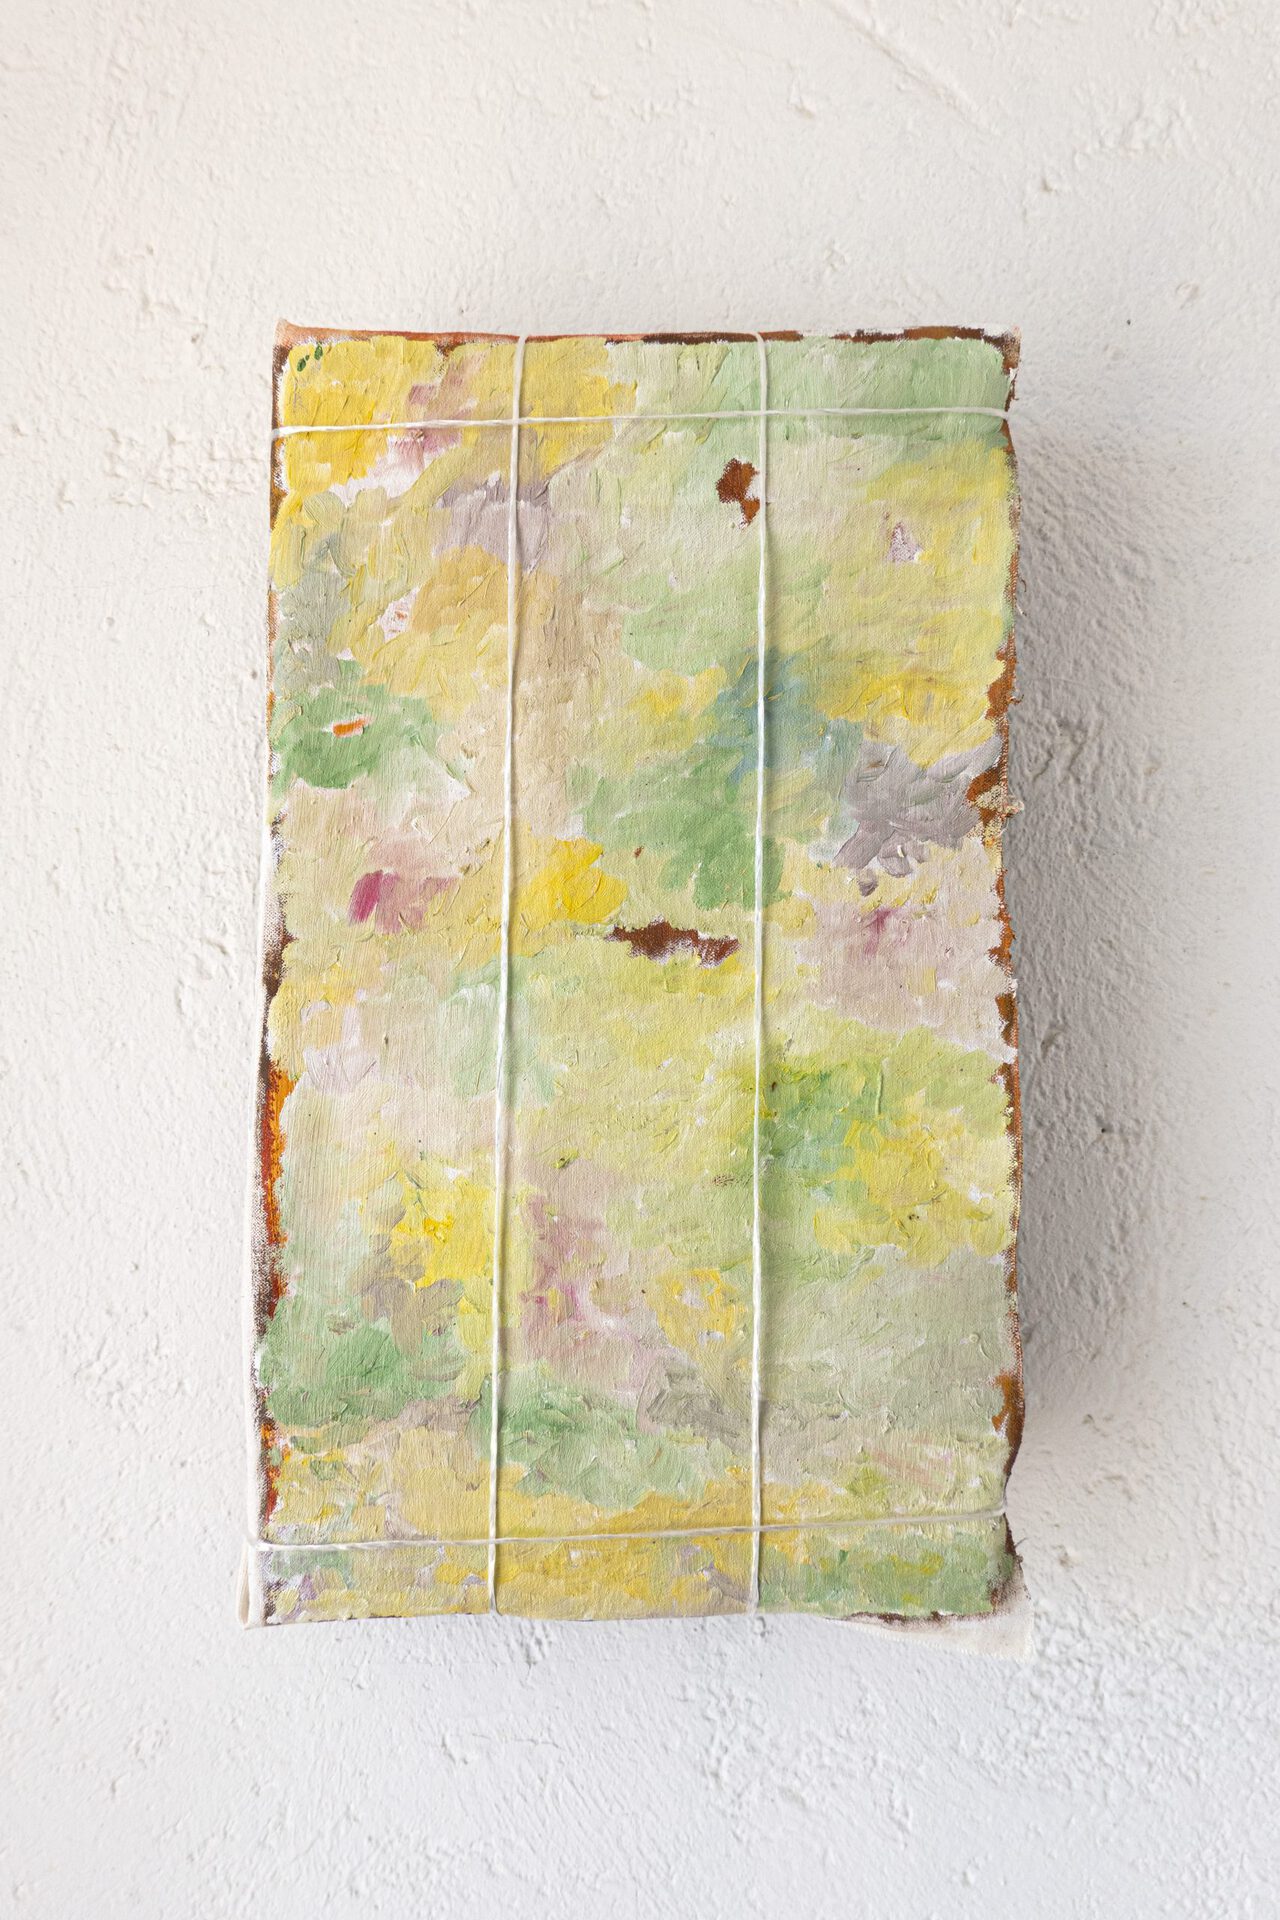 Ishai Shapira Kalter, "Aspro Chorio", 2021. Installation view. Oil painting on canvas, glued, stretched, and tied with nylon string to a vegetable / fruit wooden crate, signed with blue pen. 46 x 27 x 9.5 cm